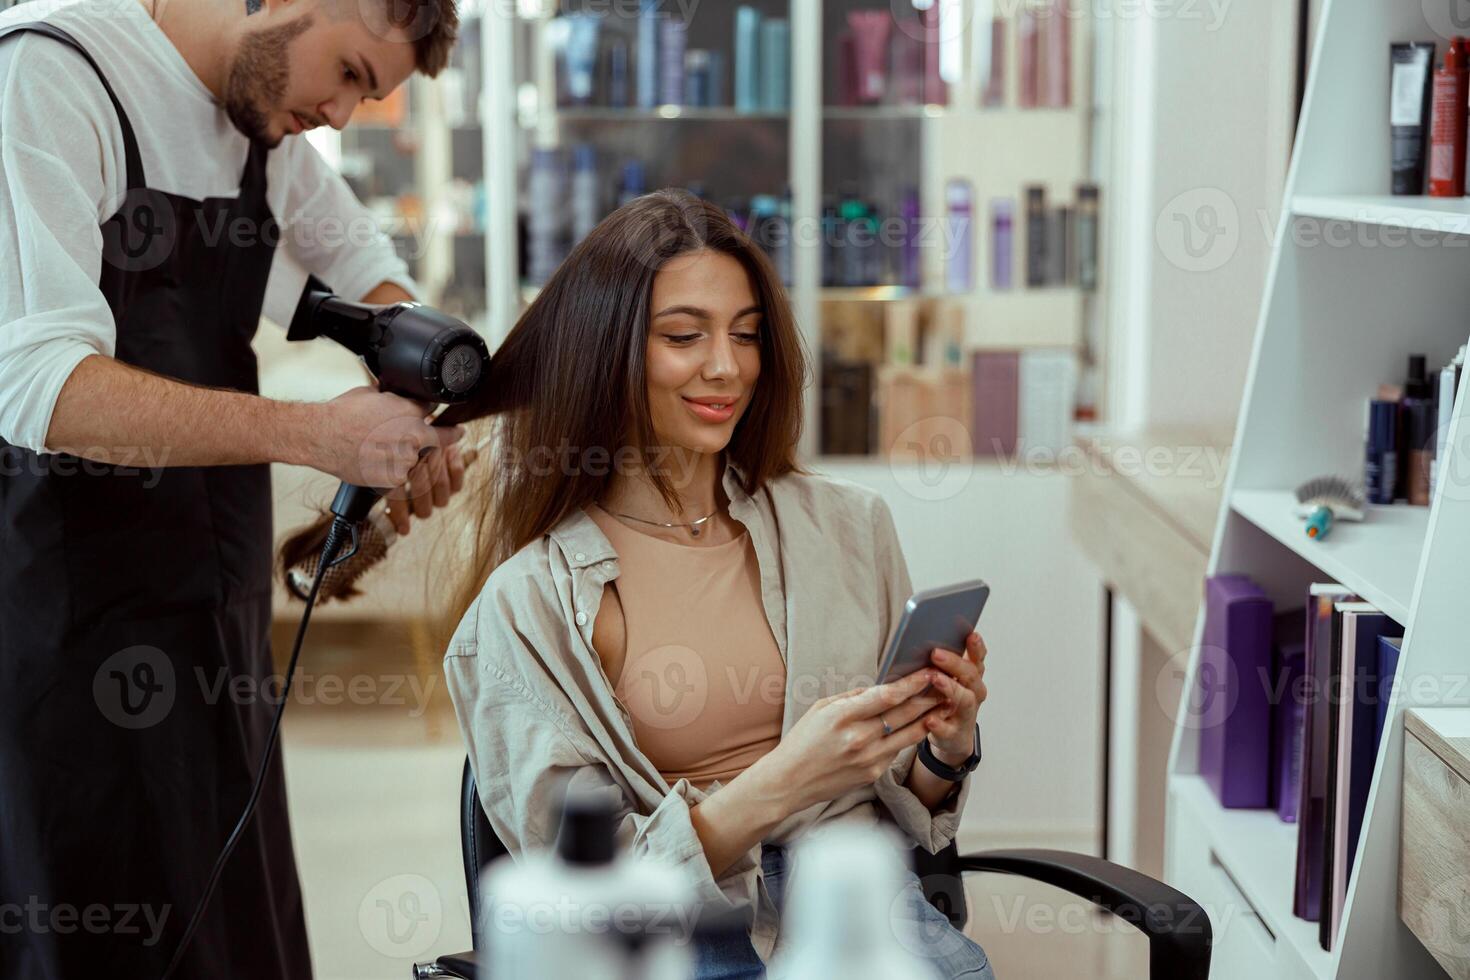 Beauty salon female customer using her phone while hairstylist doing her hair photo